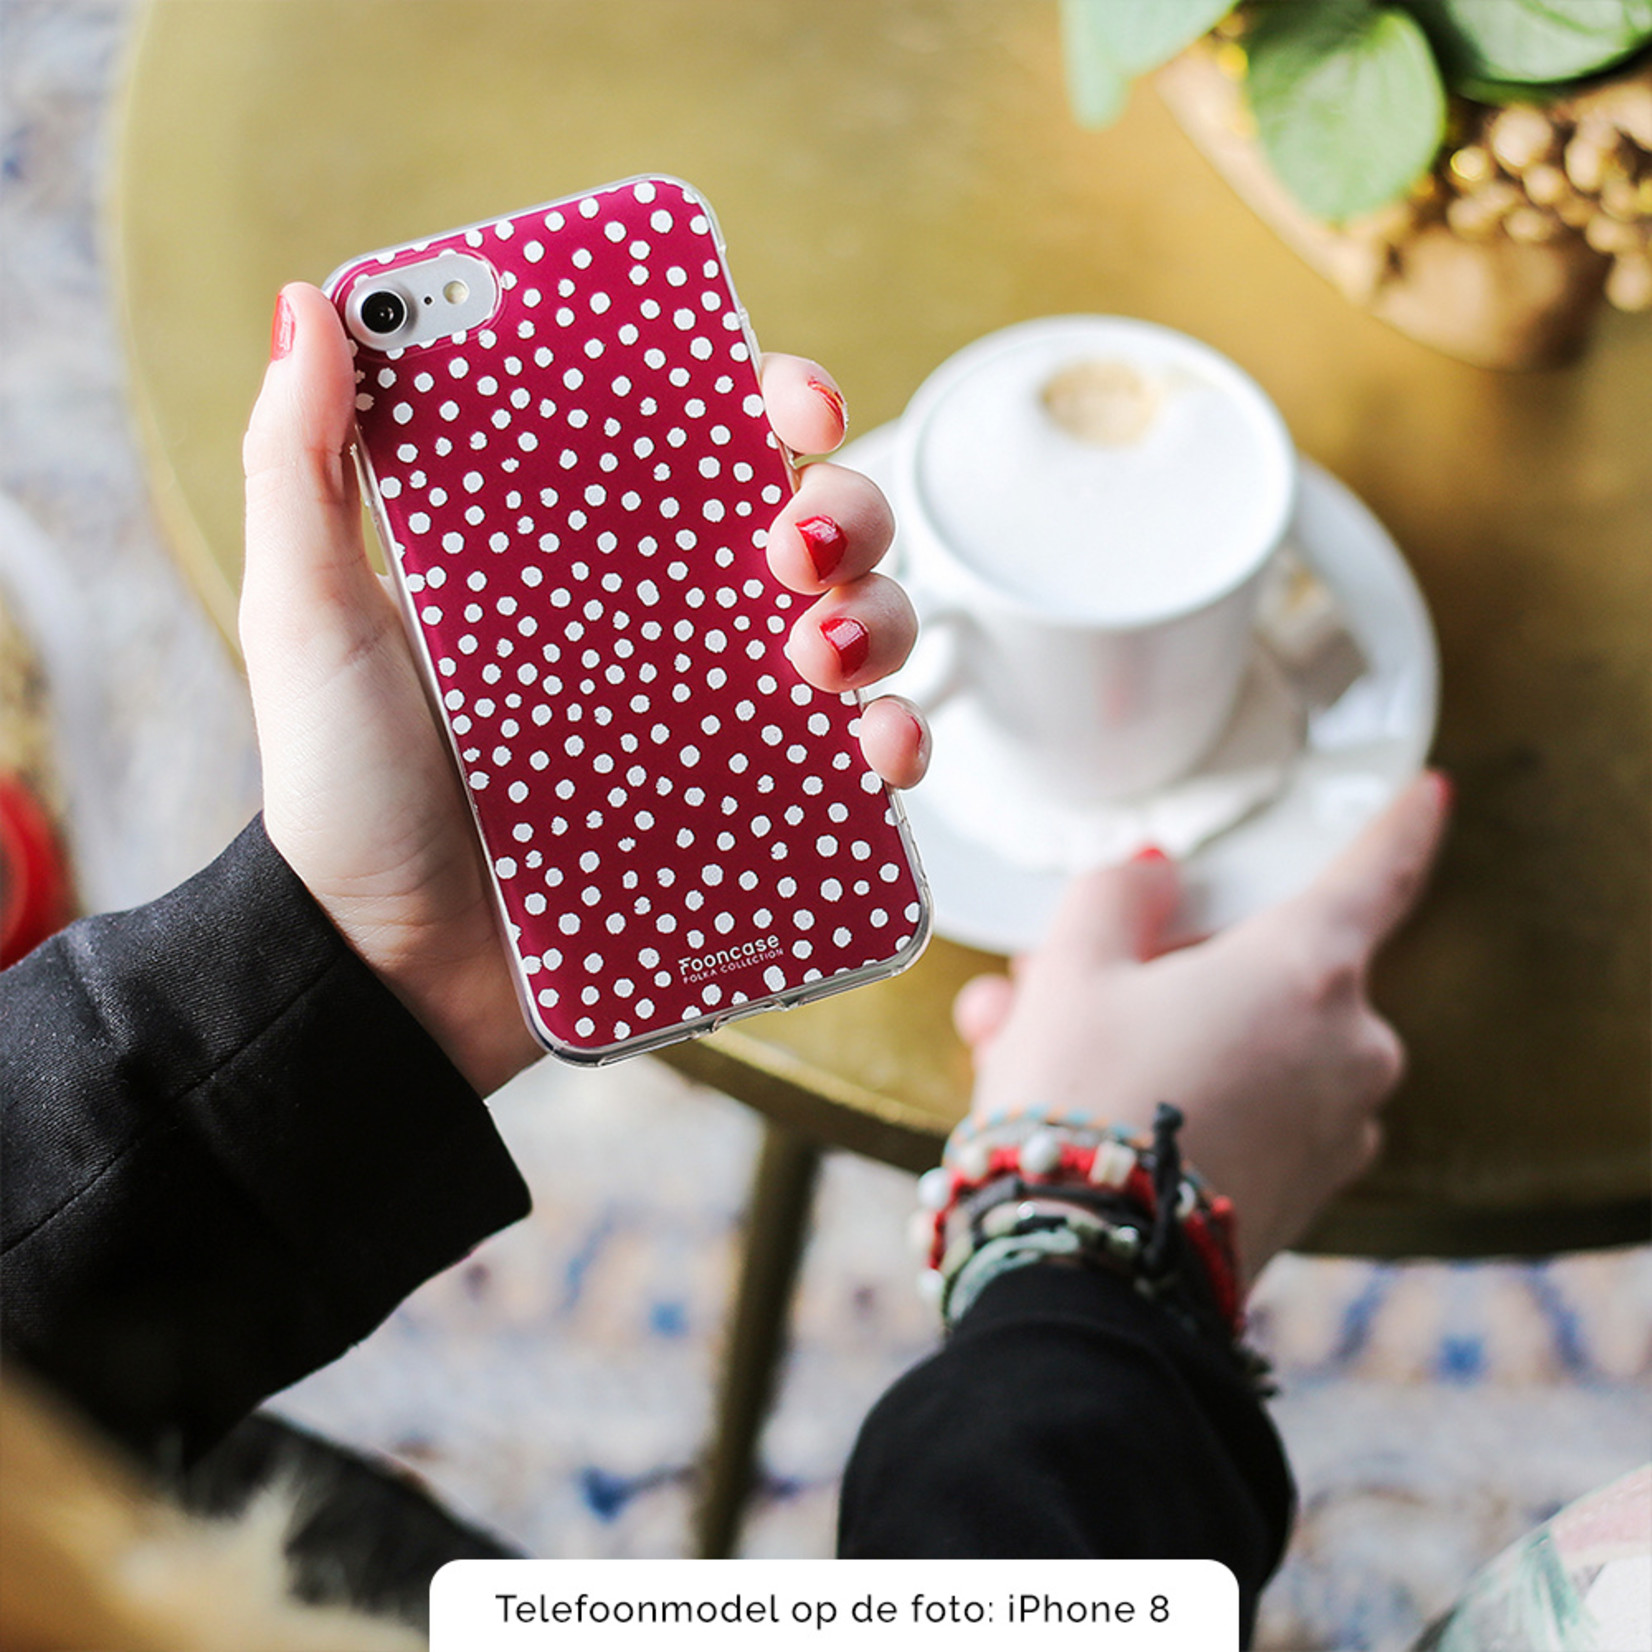 FOONCASE Iphone XR - POLKA COLLECTION / Bordeaux Red